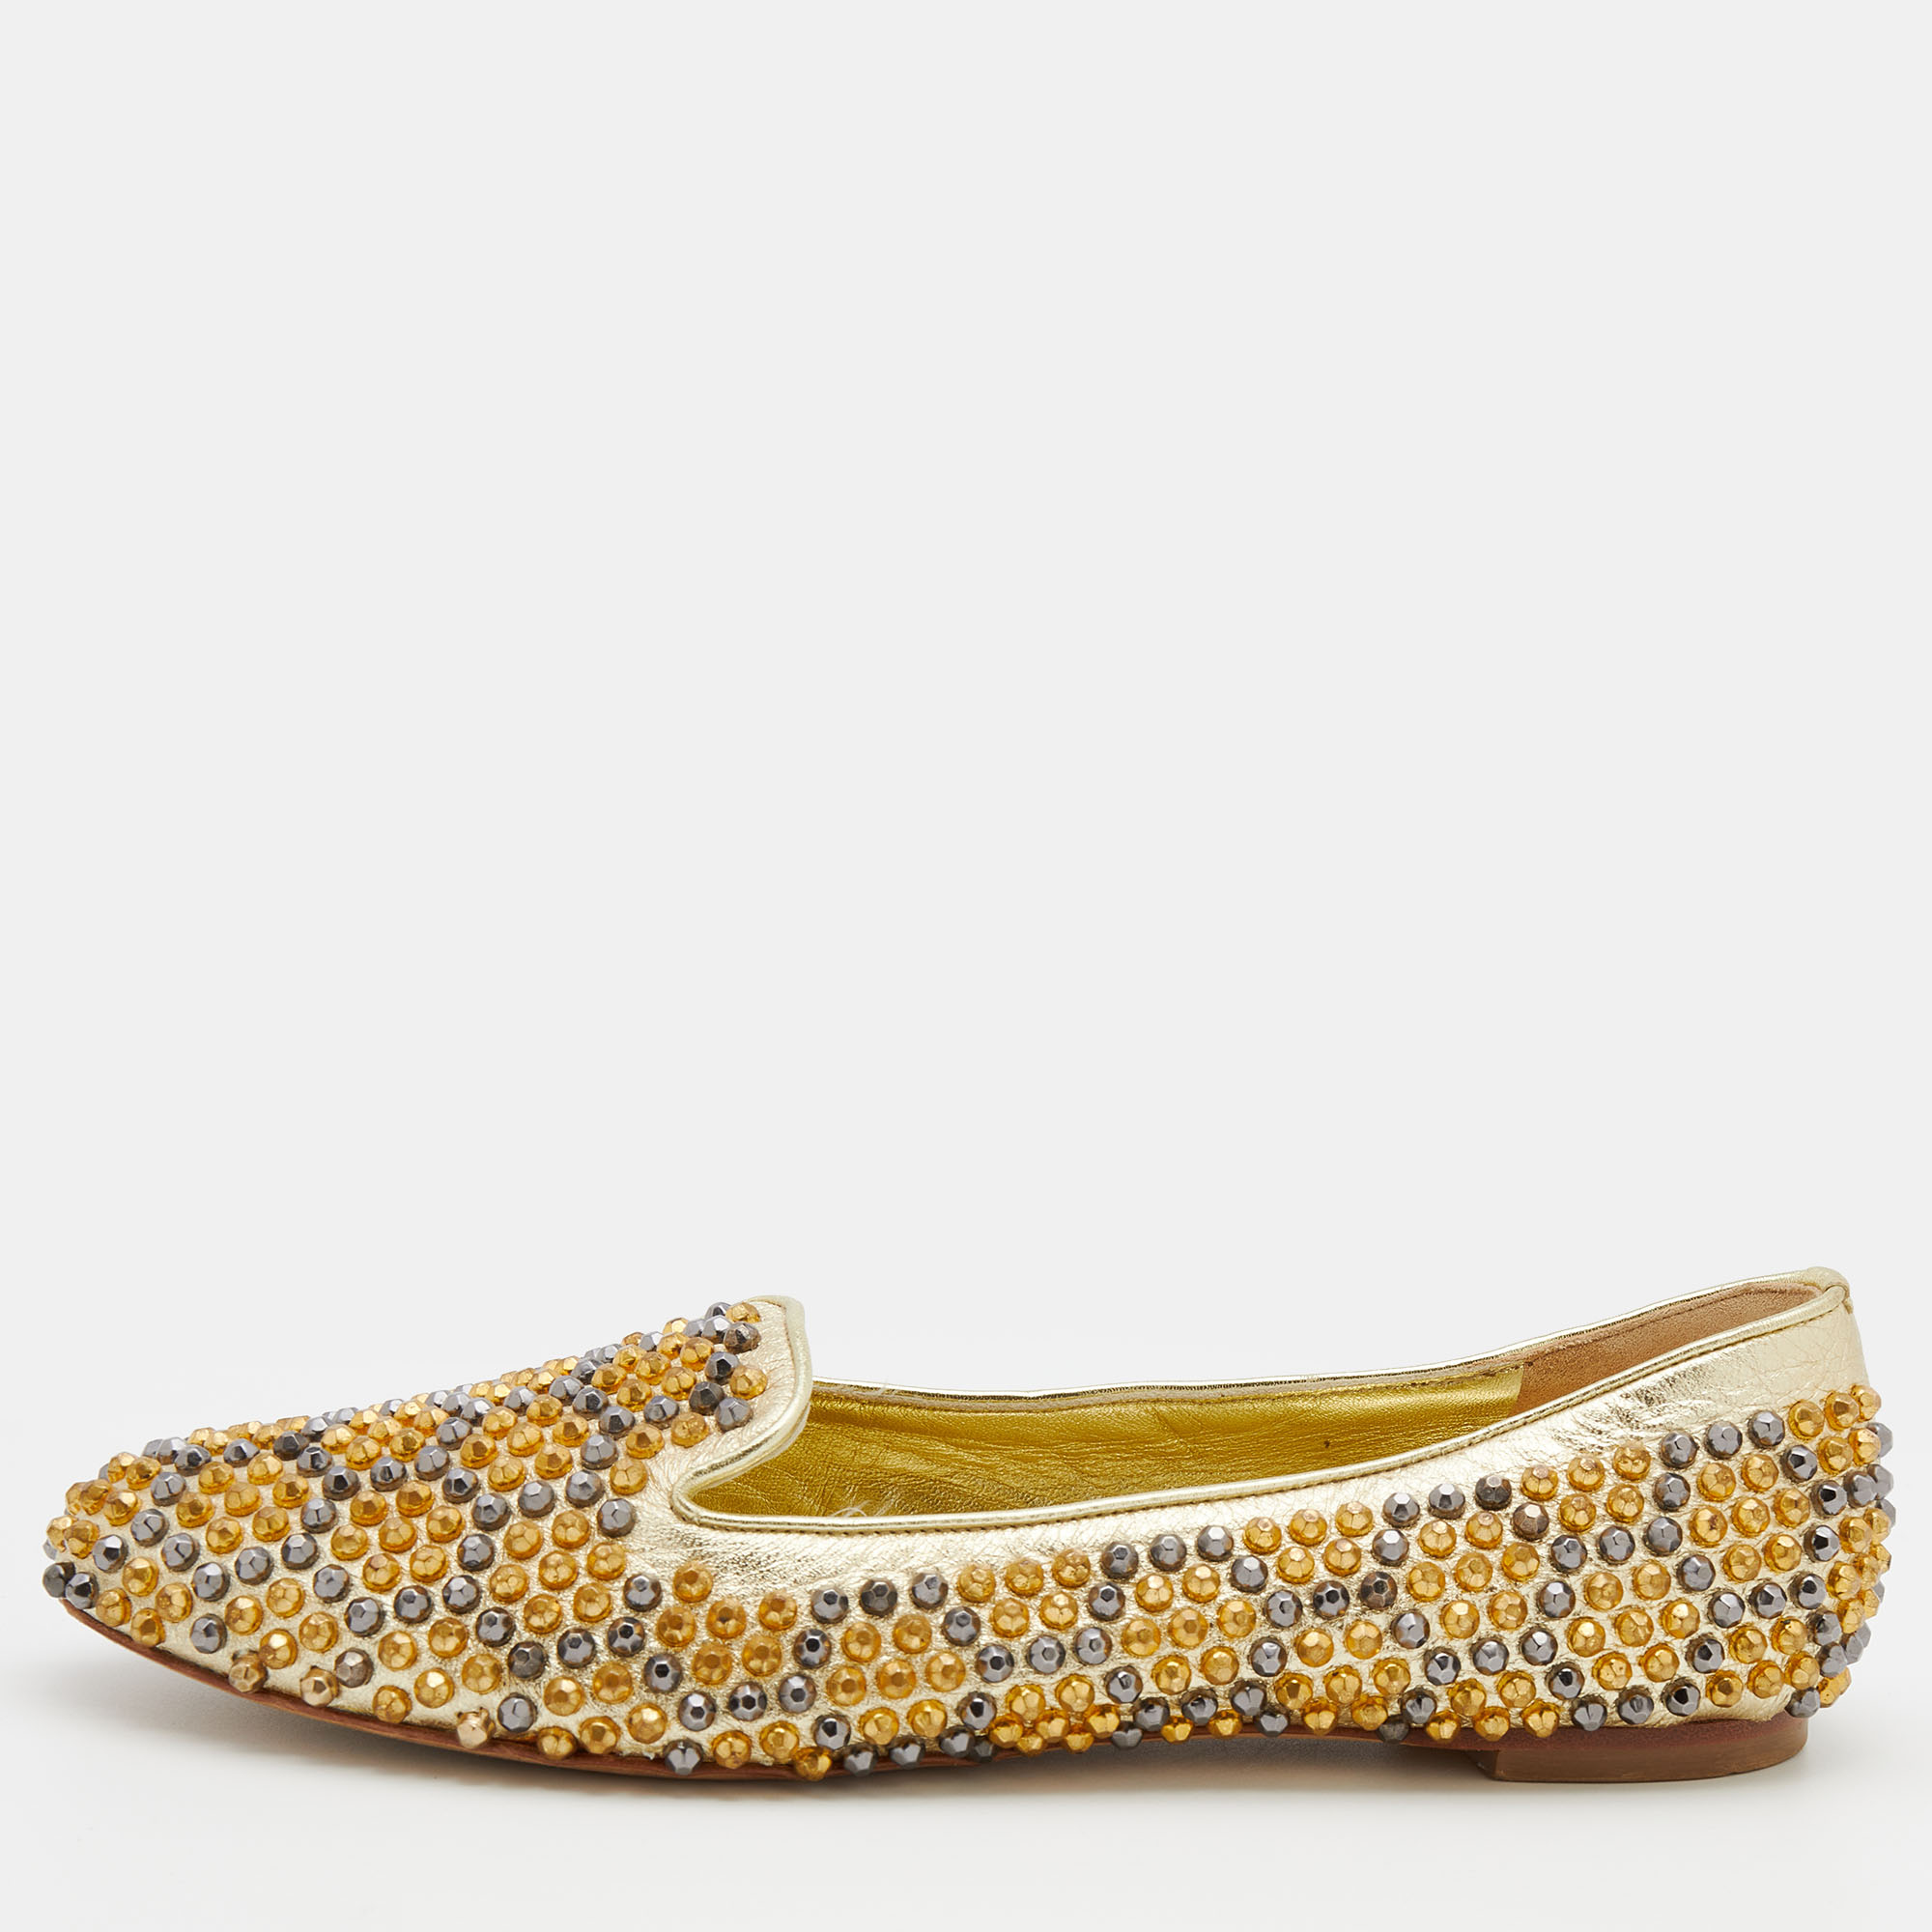 

Alexander McQueen Metallic Gold Leather Stud Embellished Smoking Slippers Size